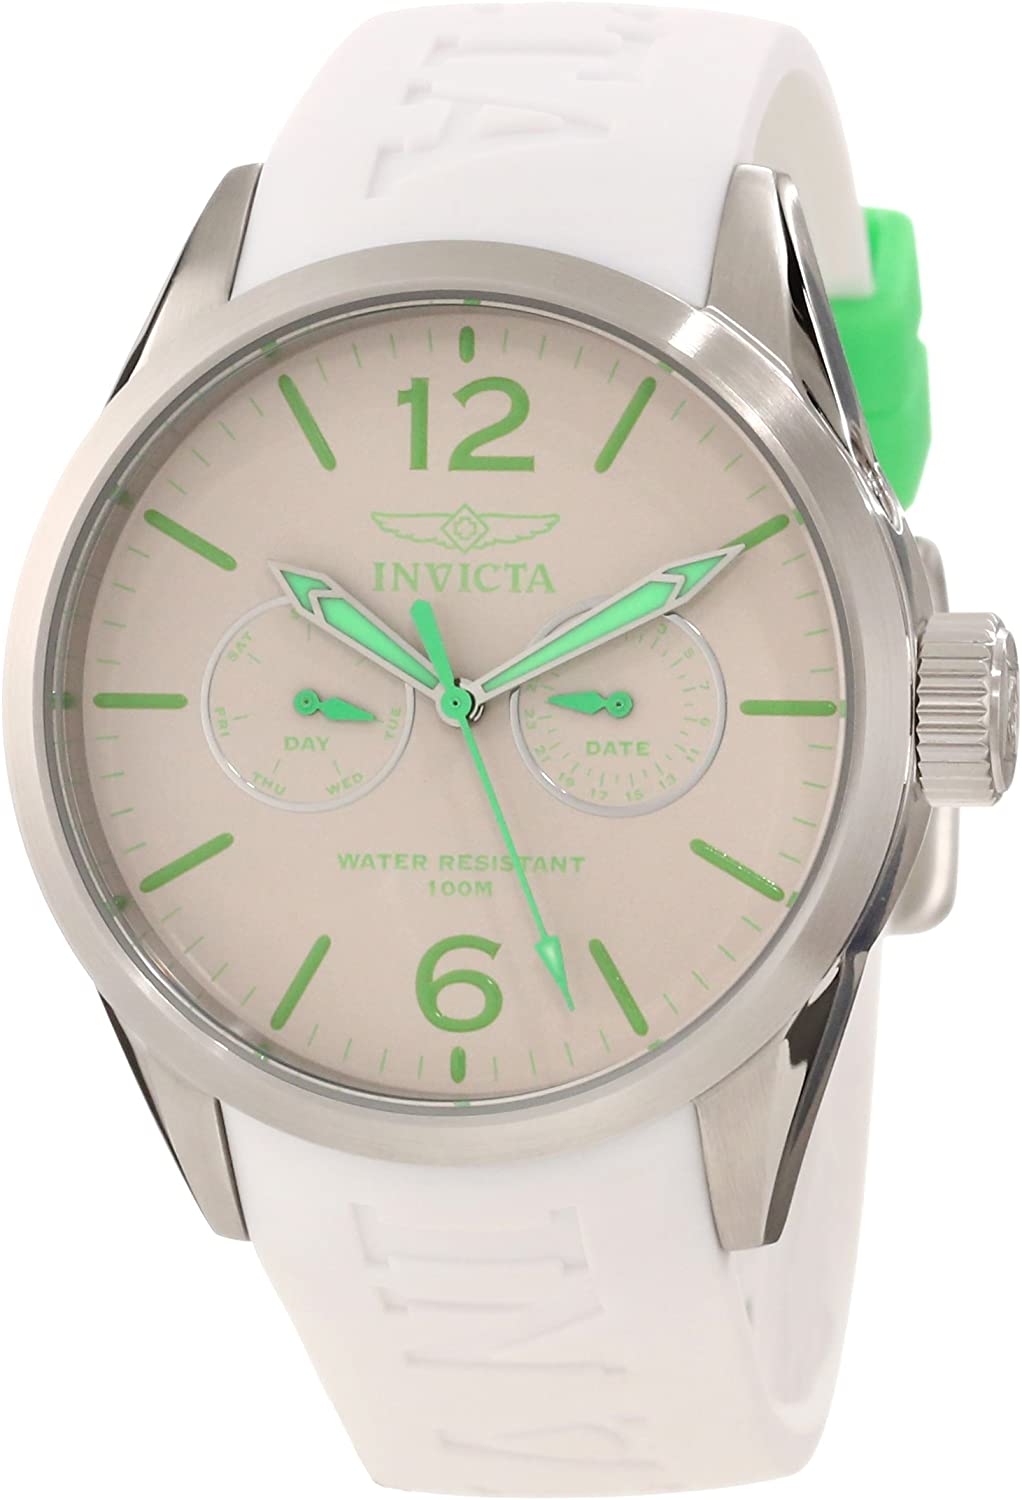 Invicta Women's 11756 I-Force White & Lime Green Rubber Watch